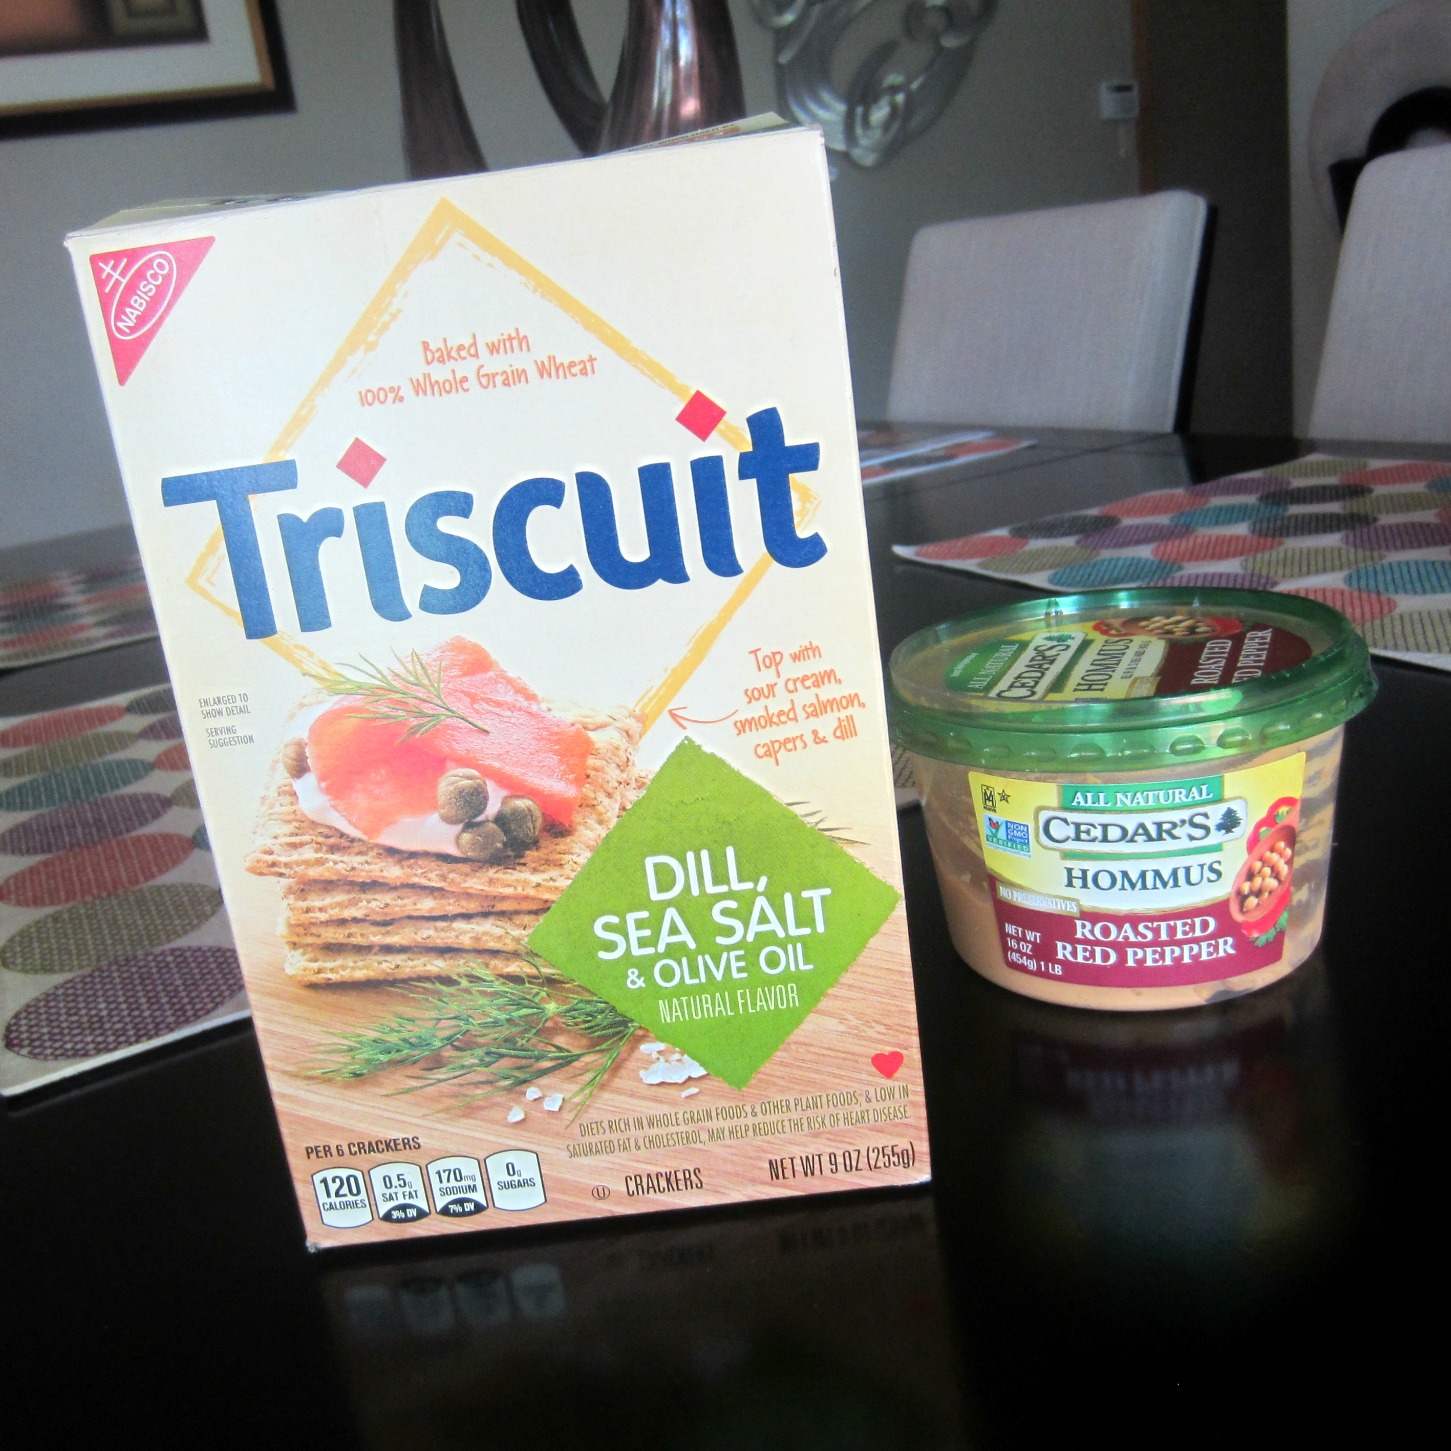 triscuit dill, sea salt & olive oil crackers